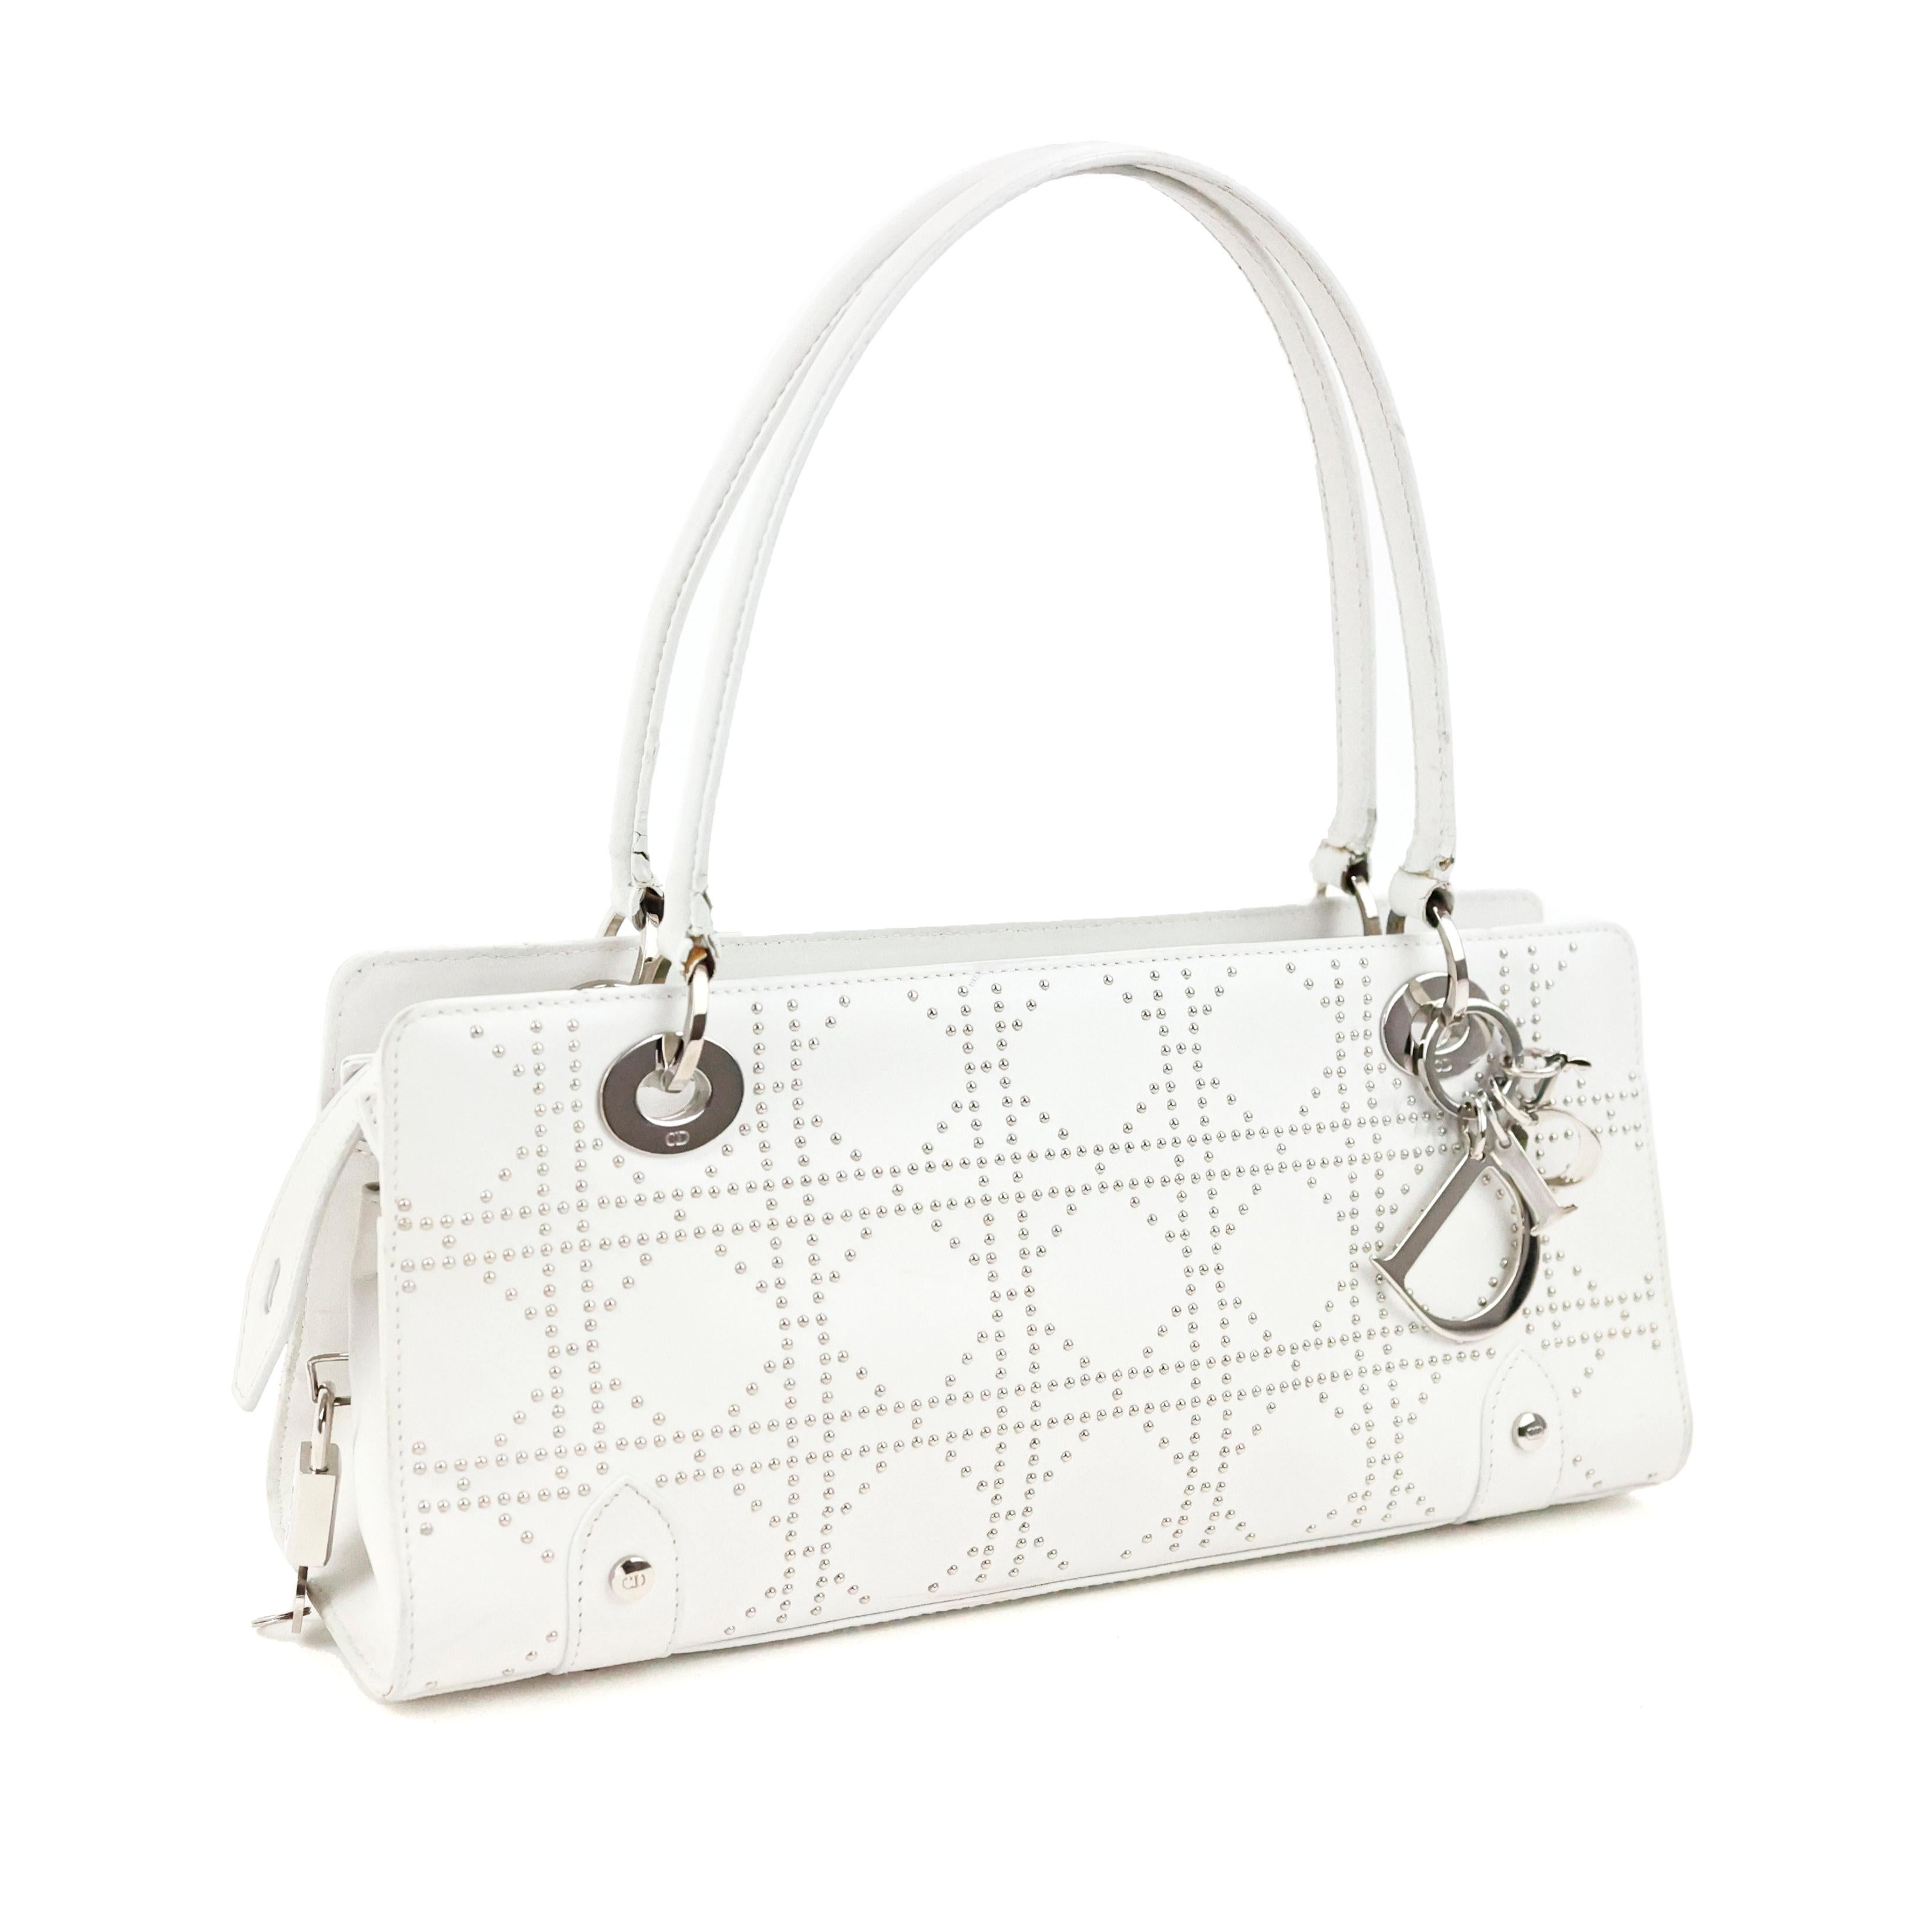 Christian Dior Lady Dior Joy in White Studded Leather For Sale 1